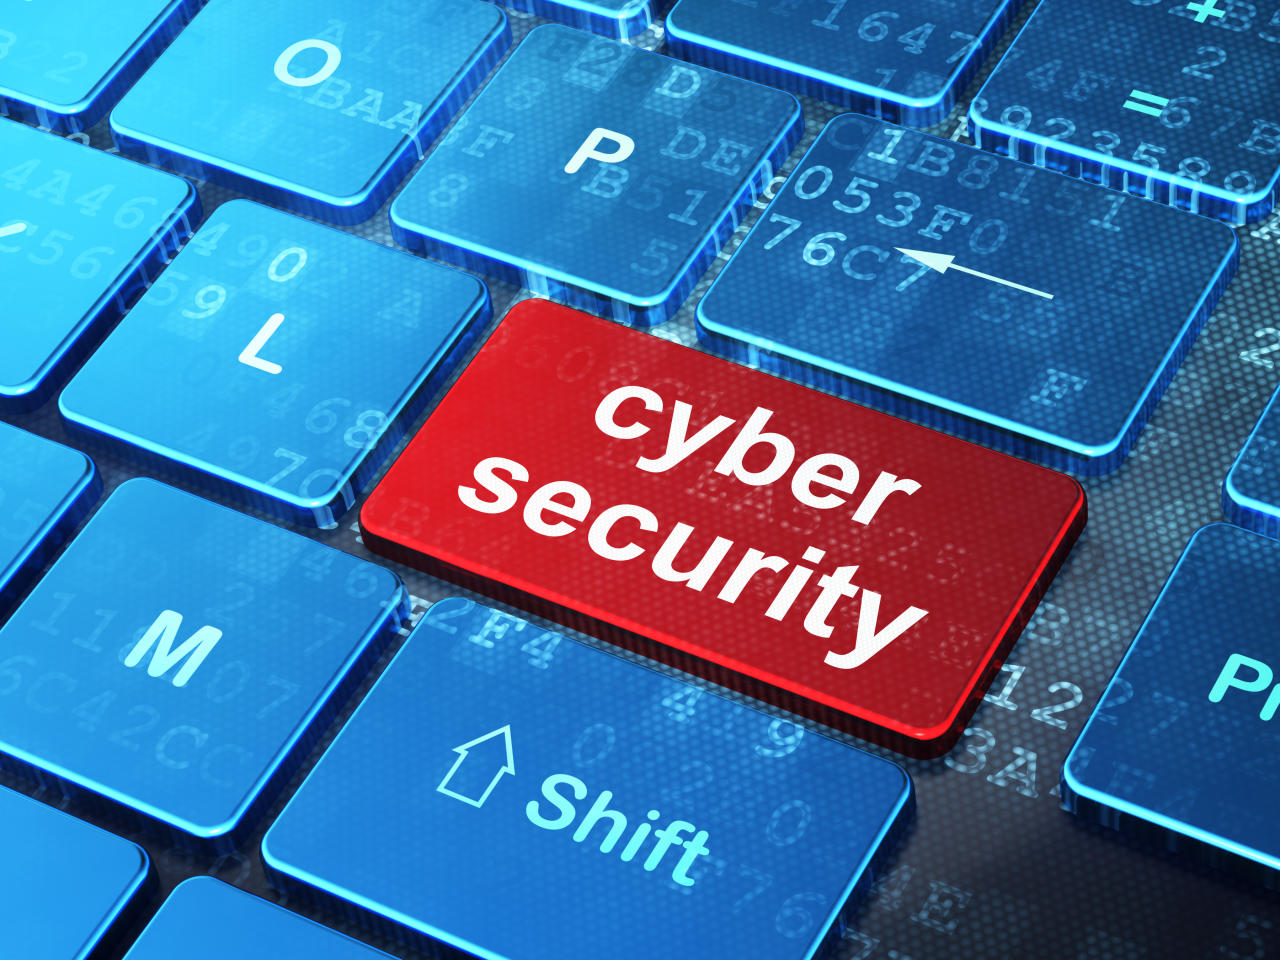 Azerbaijan ranks 48th in global index on cyber security